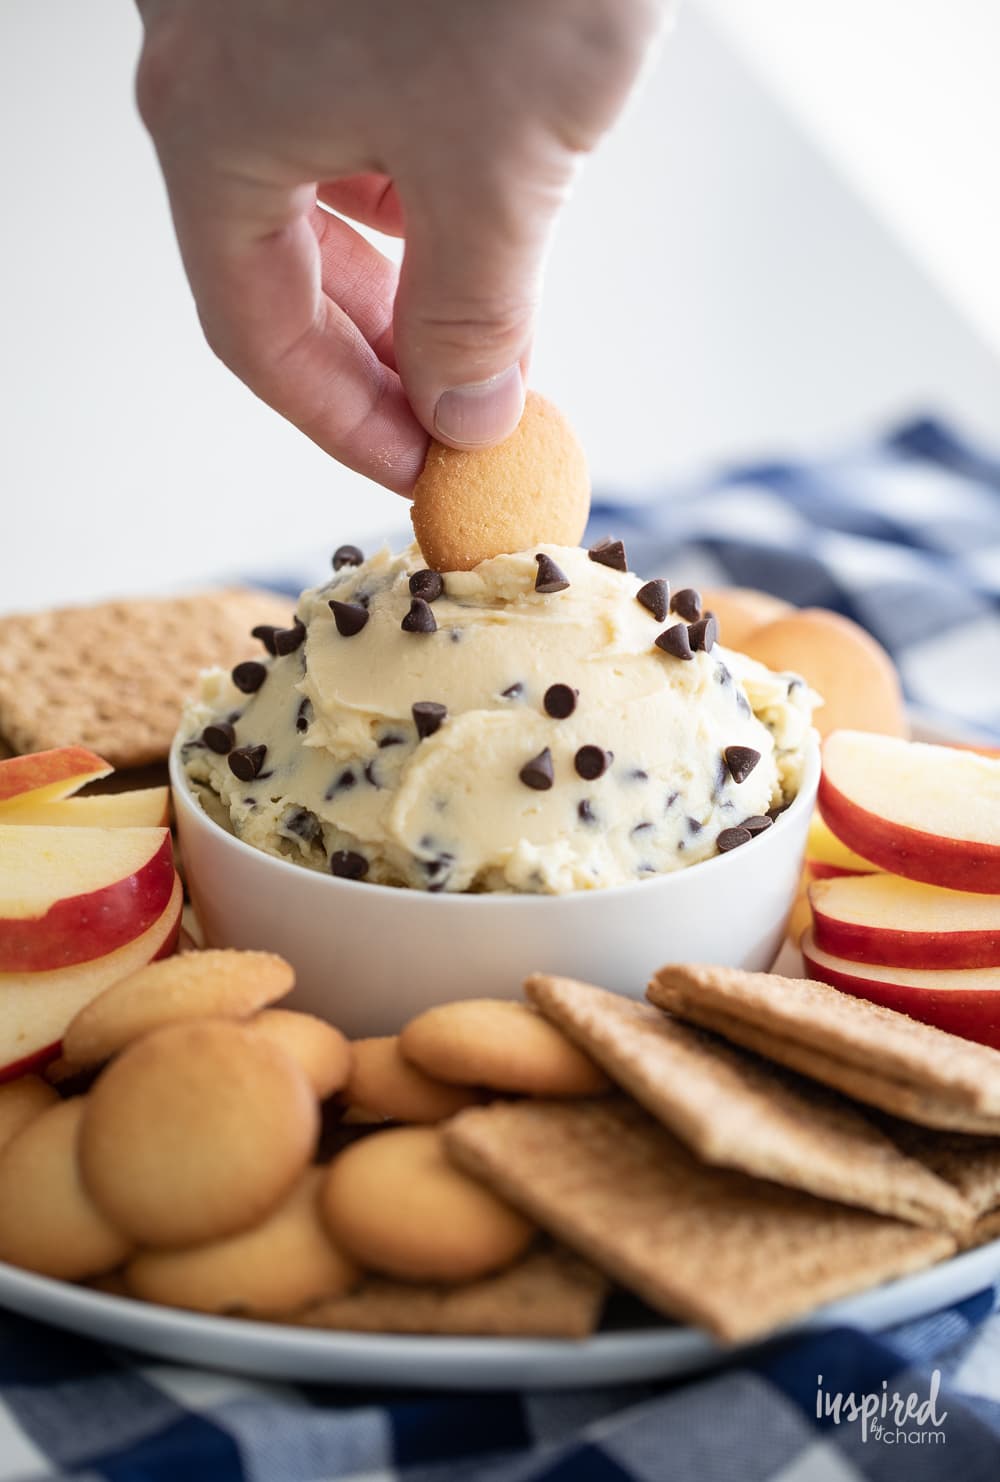 hand dipping Nilla wafer into chocolate chip cheesecake dip in a bowl with cookies and apple slices.